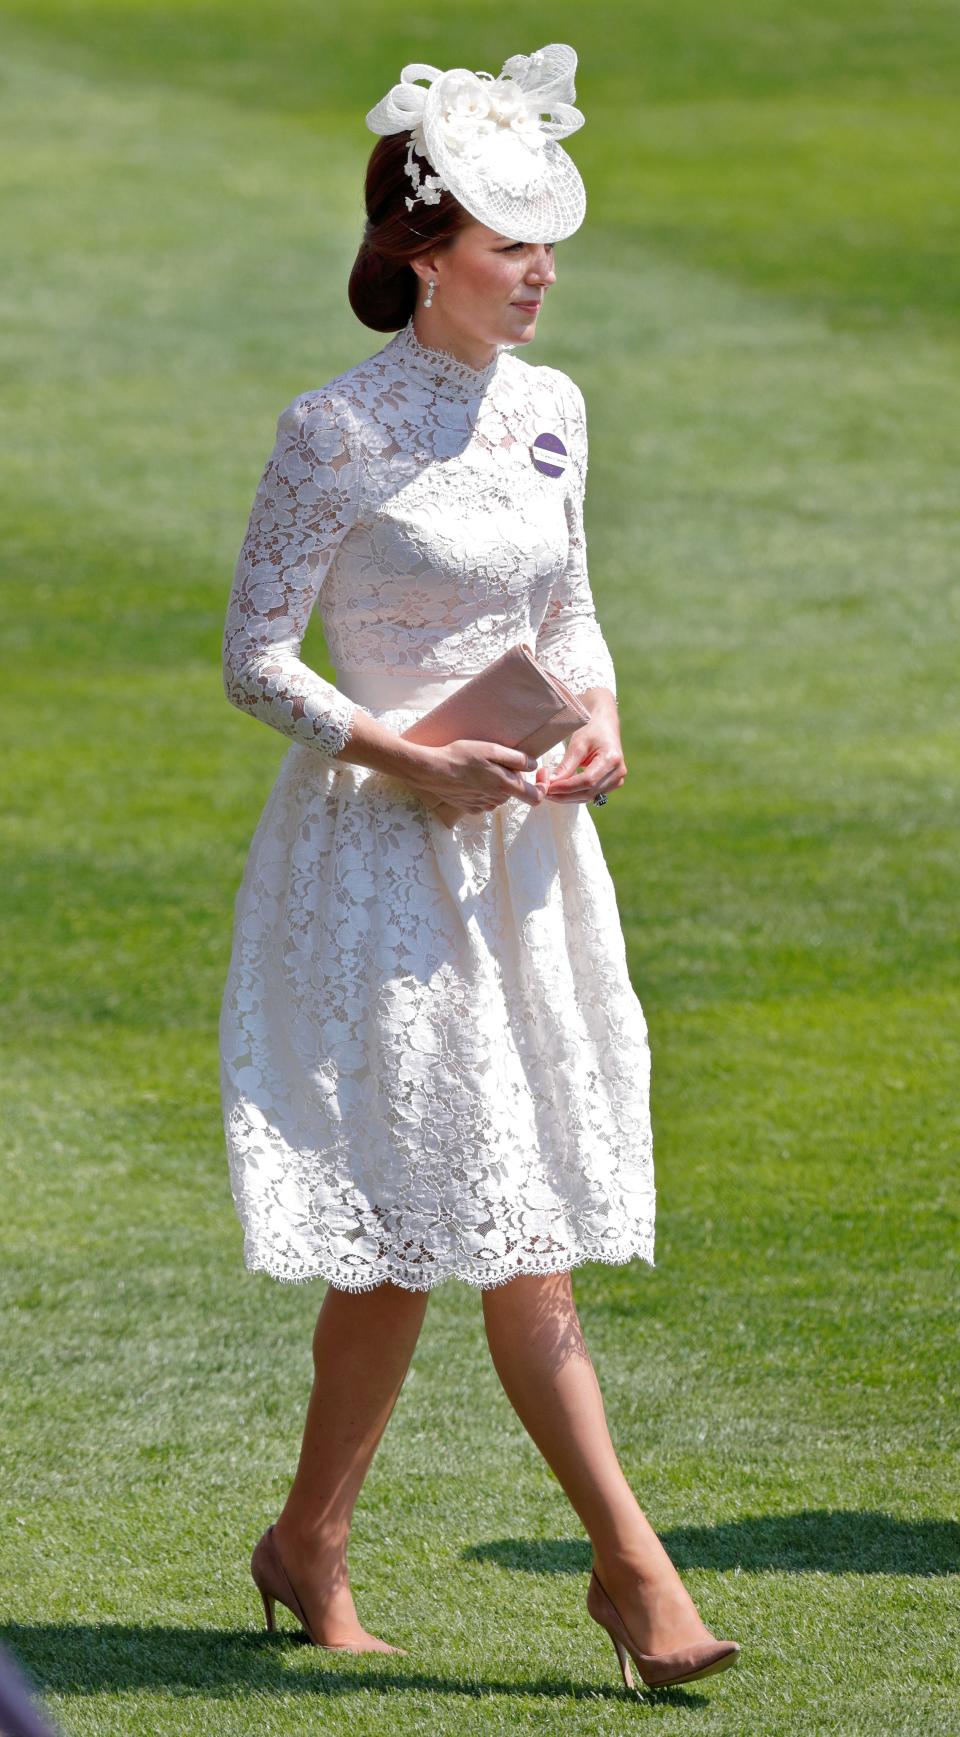 Catherine, Duchess of Cambridge attends day 1 of Royal Ascot  - Max Mumby